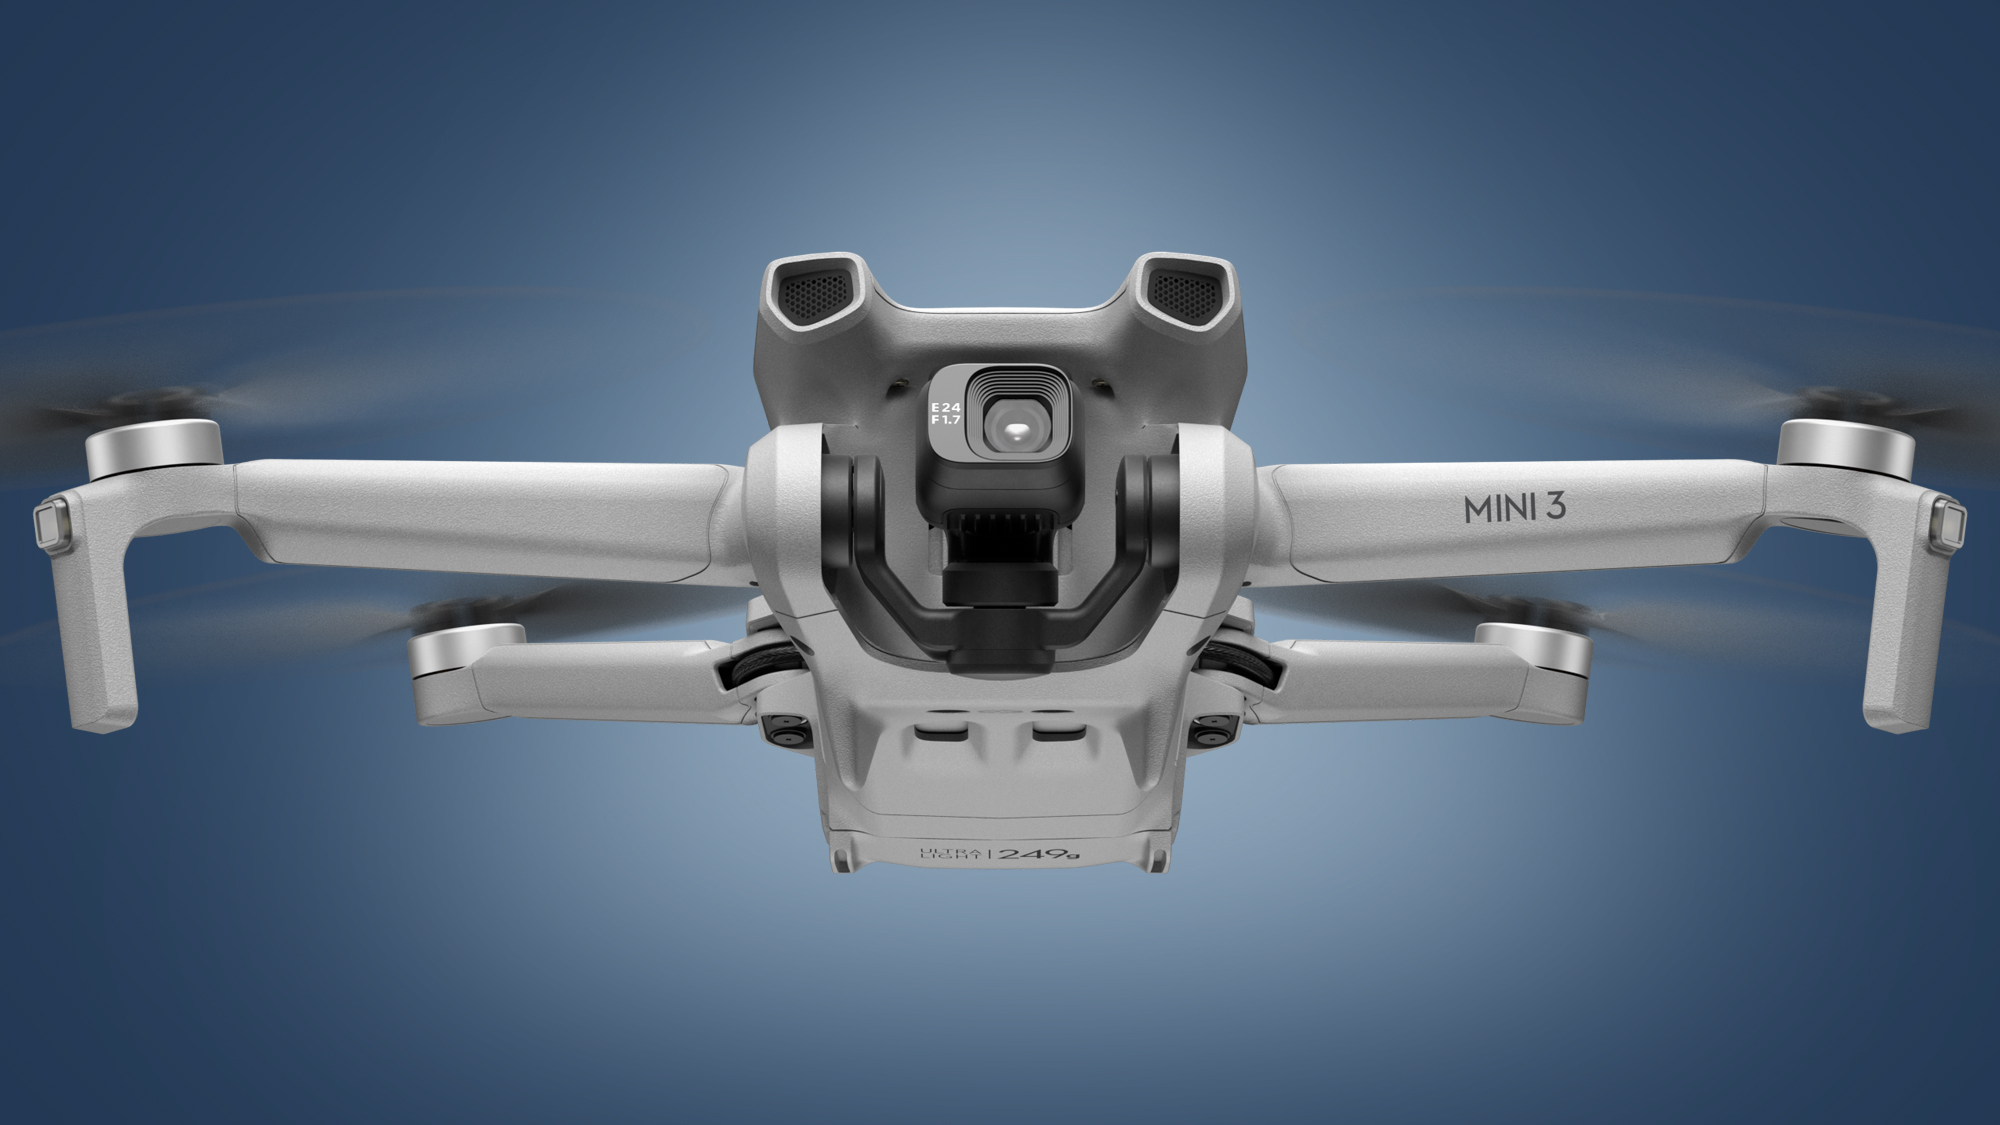 The DJI Mini 3 drone on a blue background